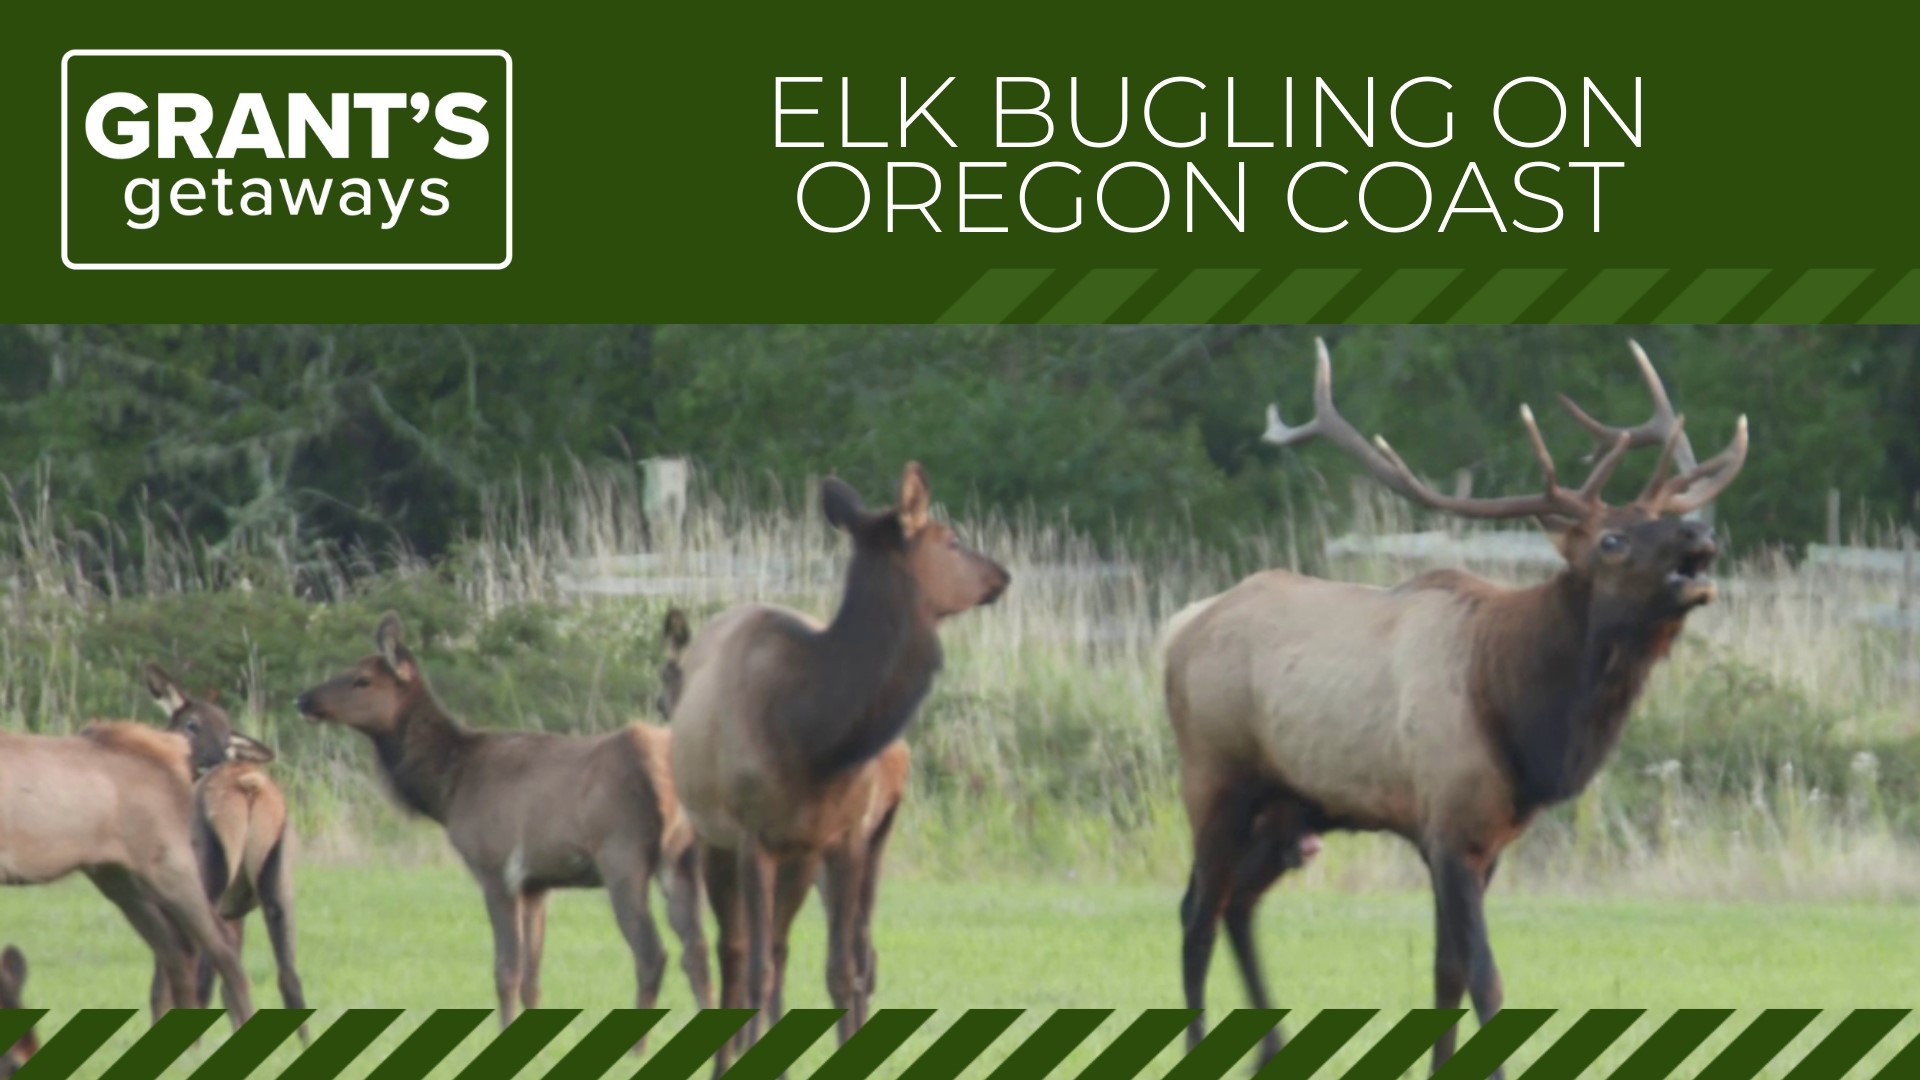 It's bull elk breeding season and that means peak time for viewing the animals. Grant McOmie visited three wildlife destinations around the coast range.